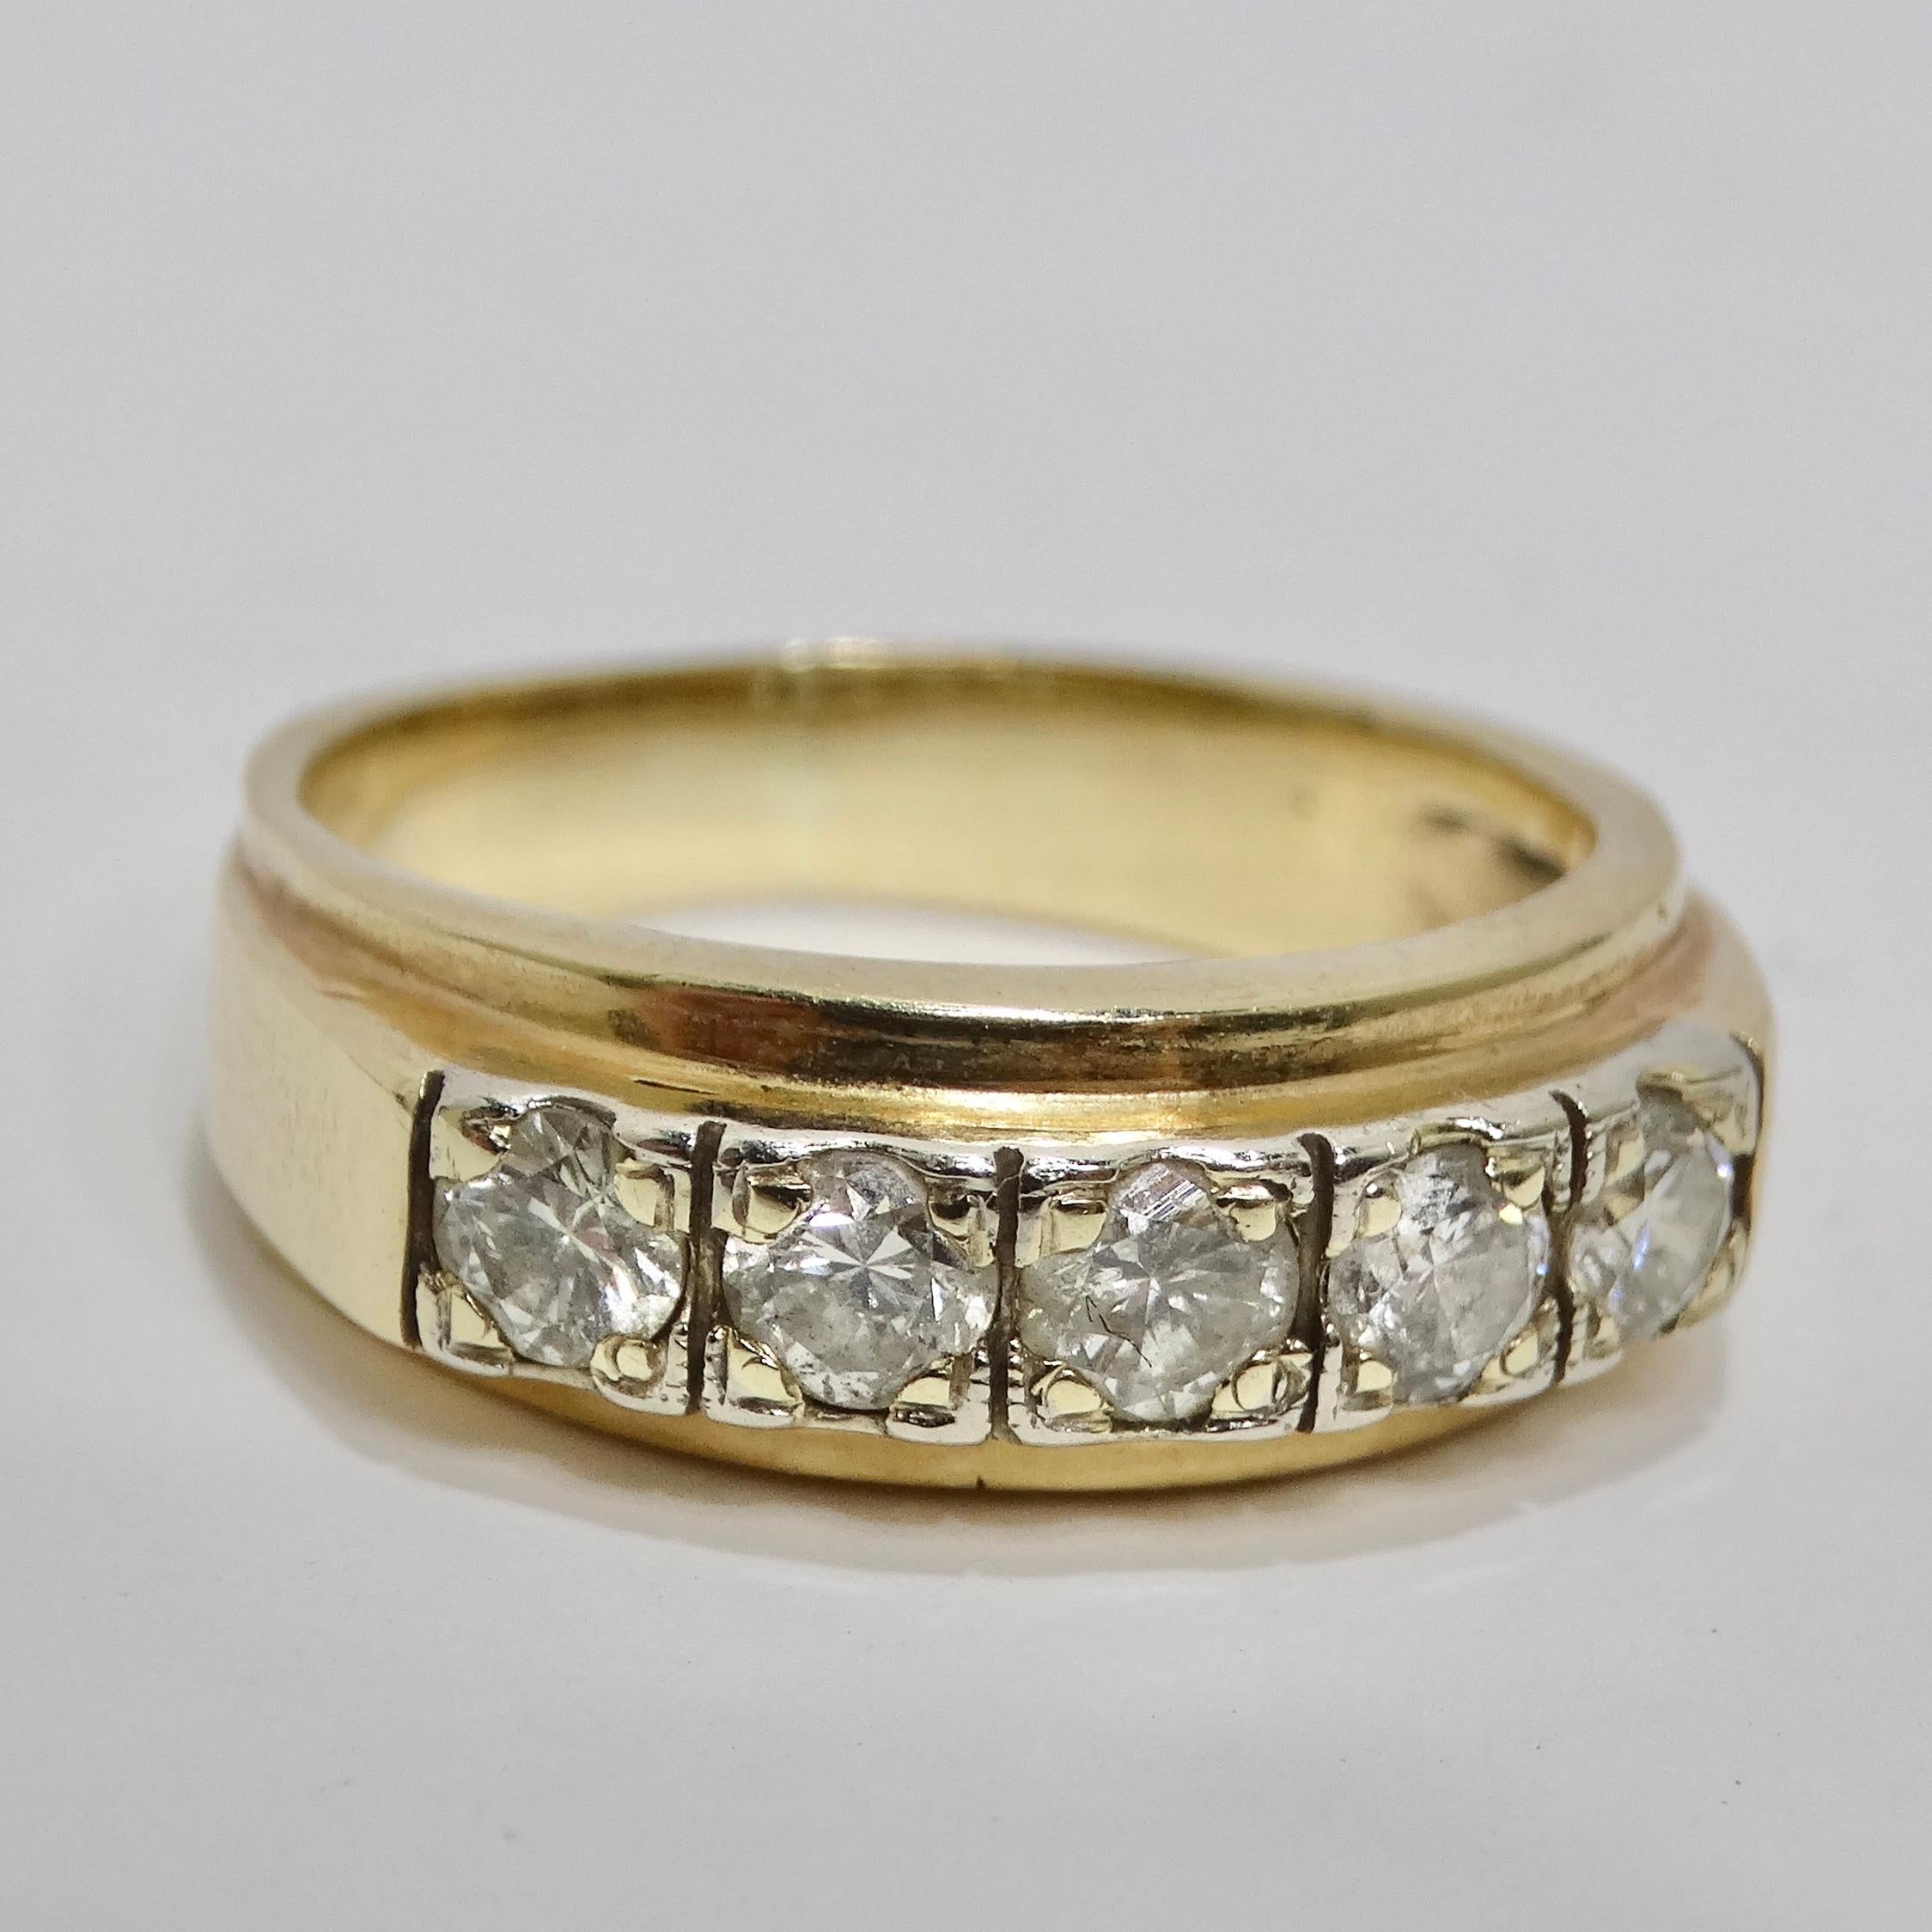 Elevate your jewelry collection with this 1970s 18K Gold Custom Diamond Ring. This classic and versatile ring features five dazzling diamonds, totaling approximately 1.5 carats, set within a beautiful 18K gold band. With its timeless design and